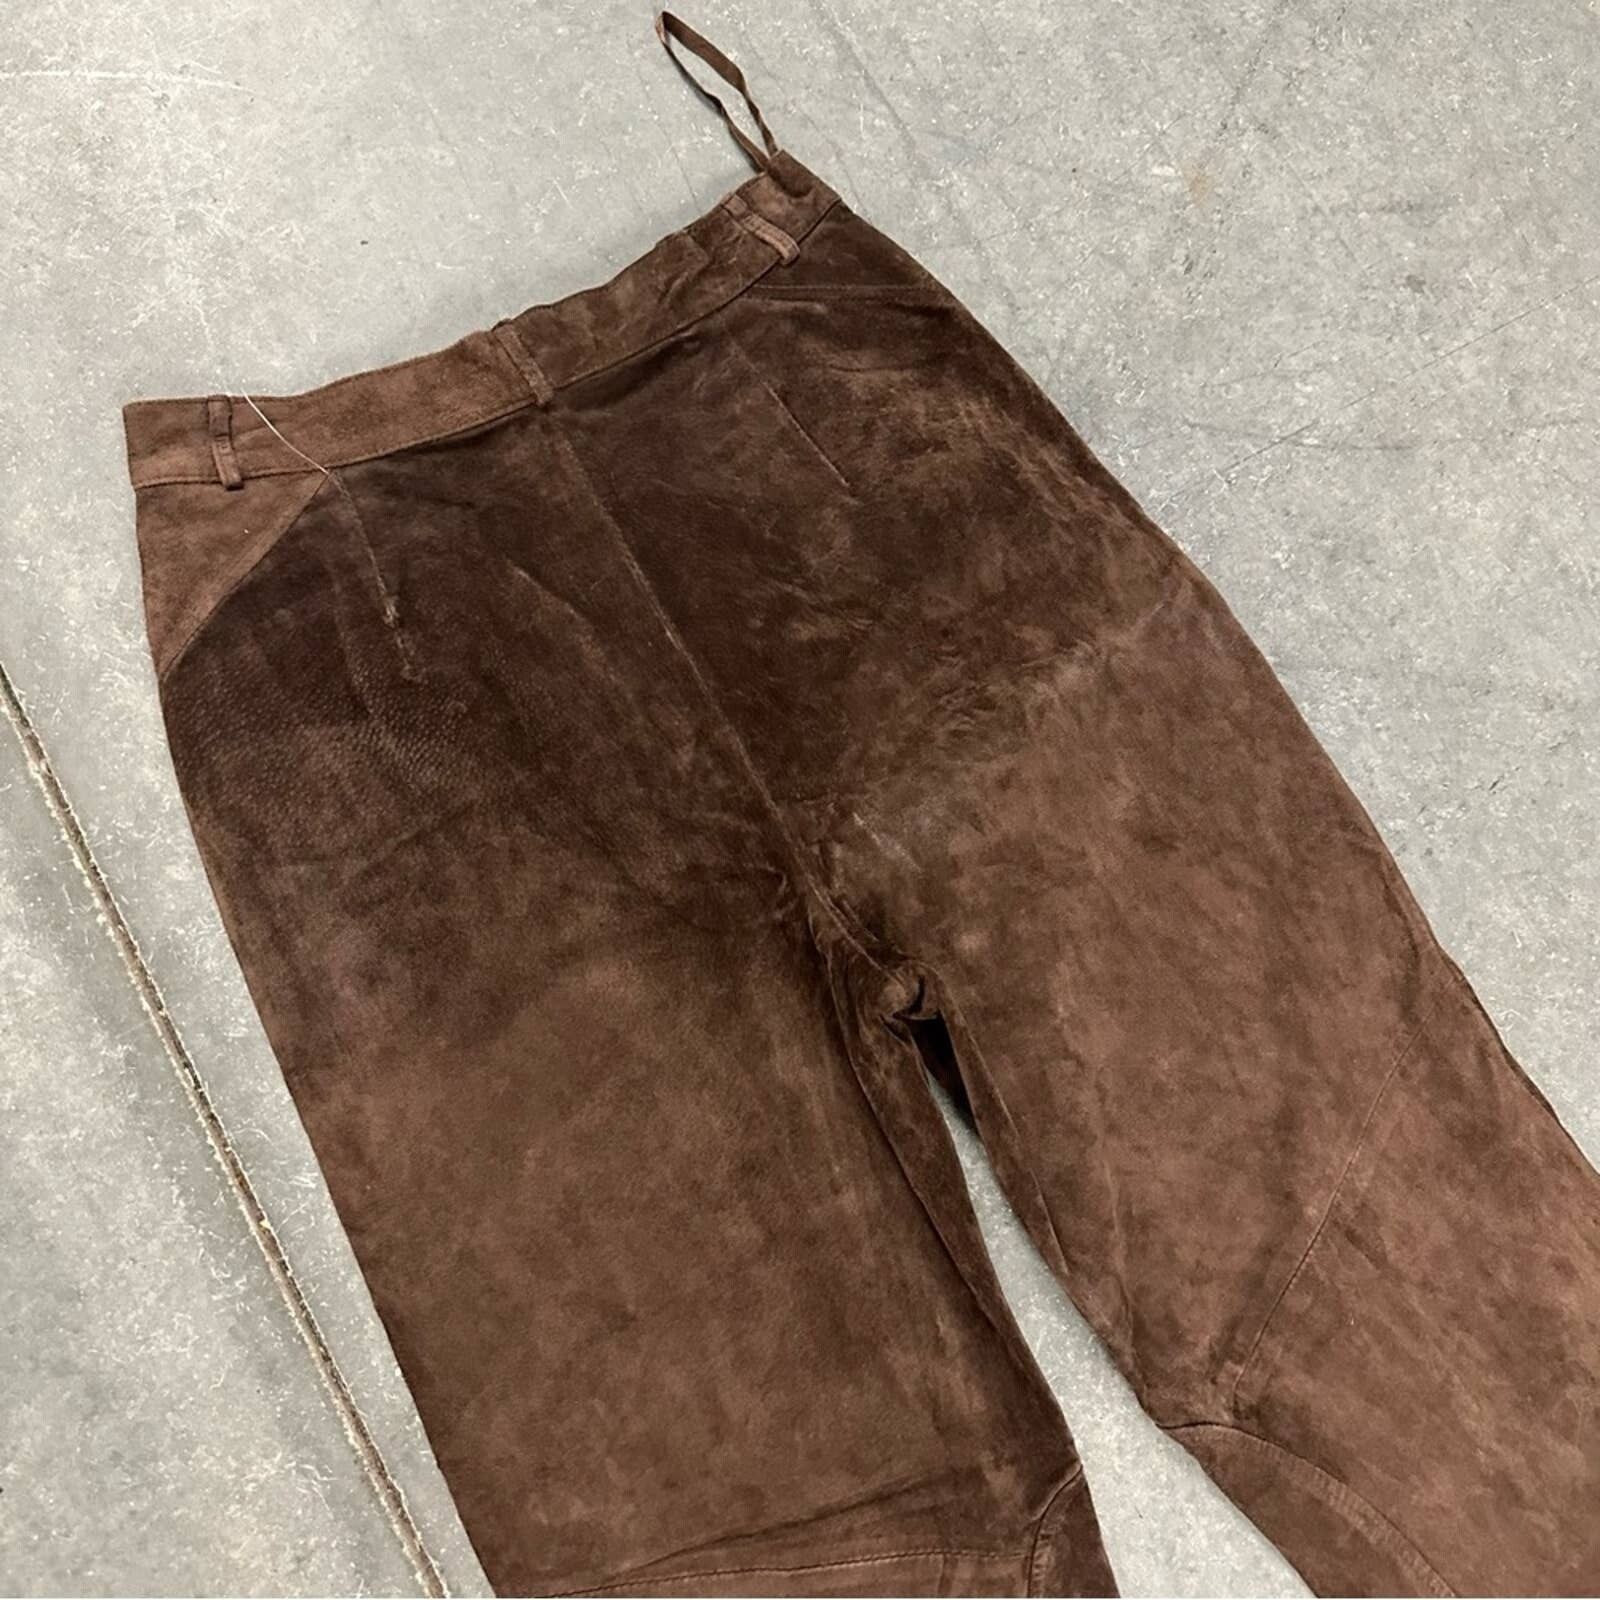 Vintage Vintage 80s 90s brown suede leather tapered pants 10 Size 32" / US 10 / IT 46 - 4 Preview